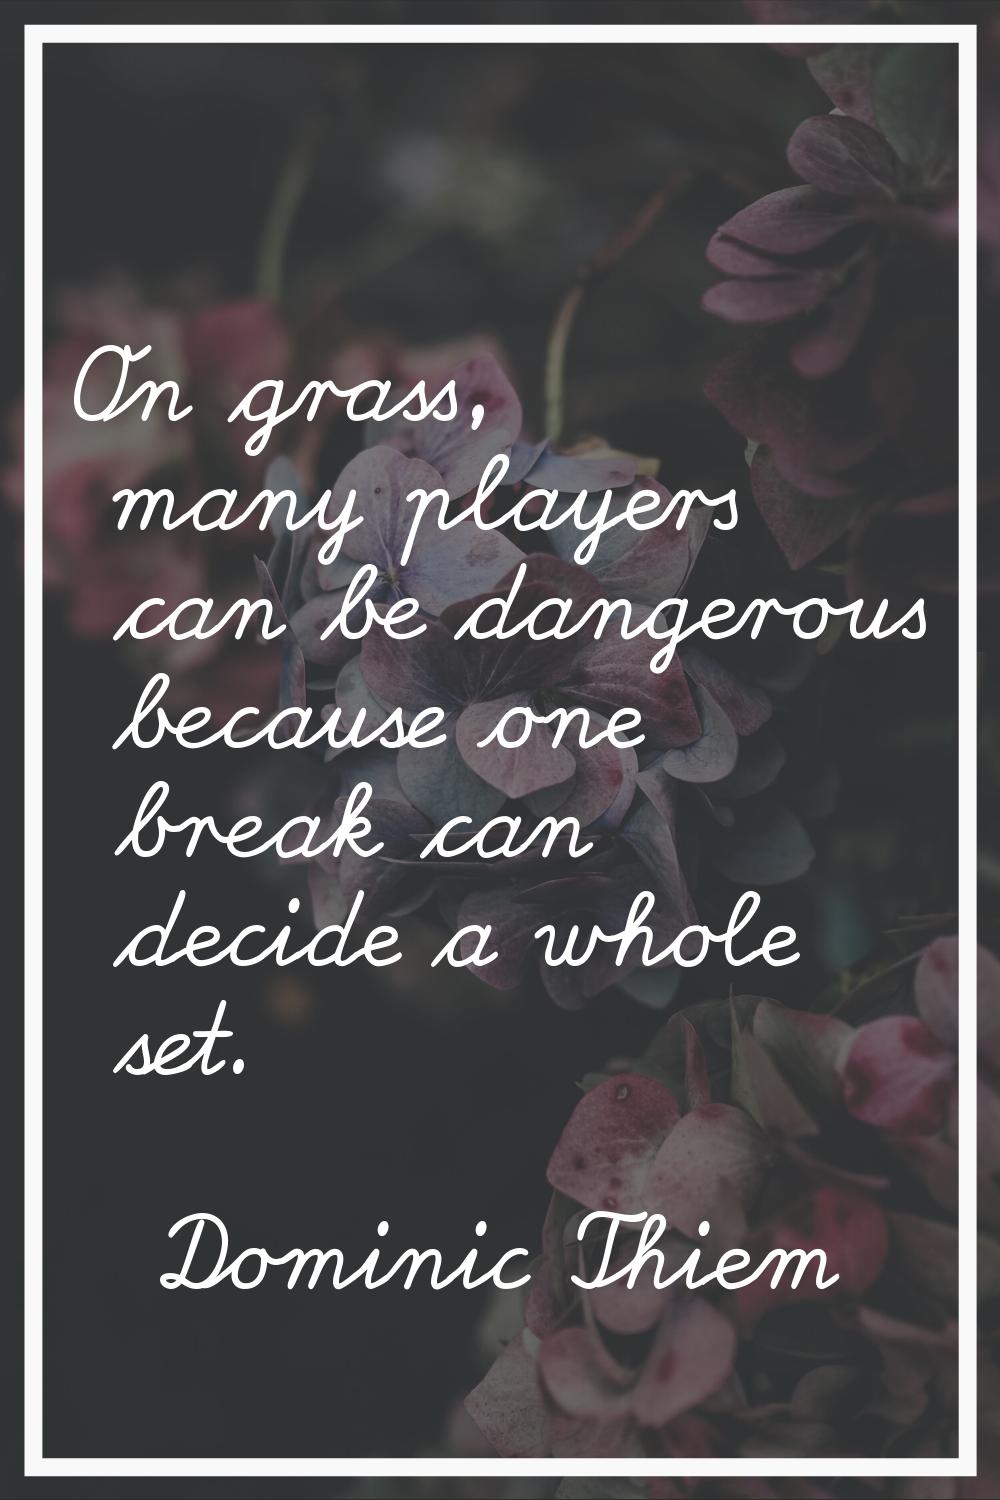 On grass, many players can be dangerous because one break can decide a whole set.